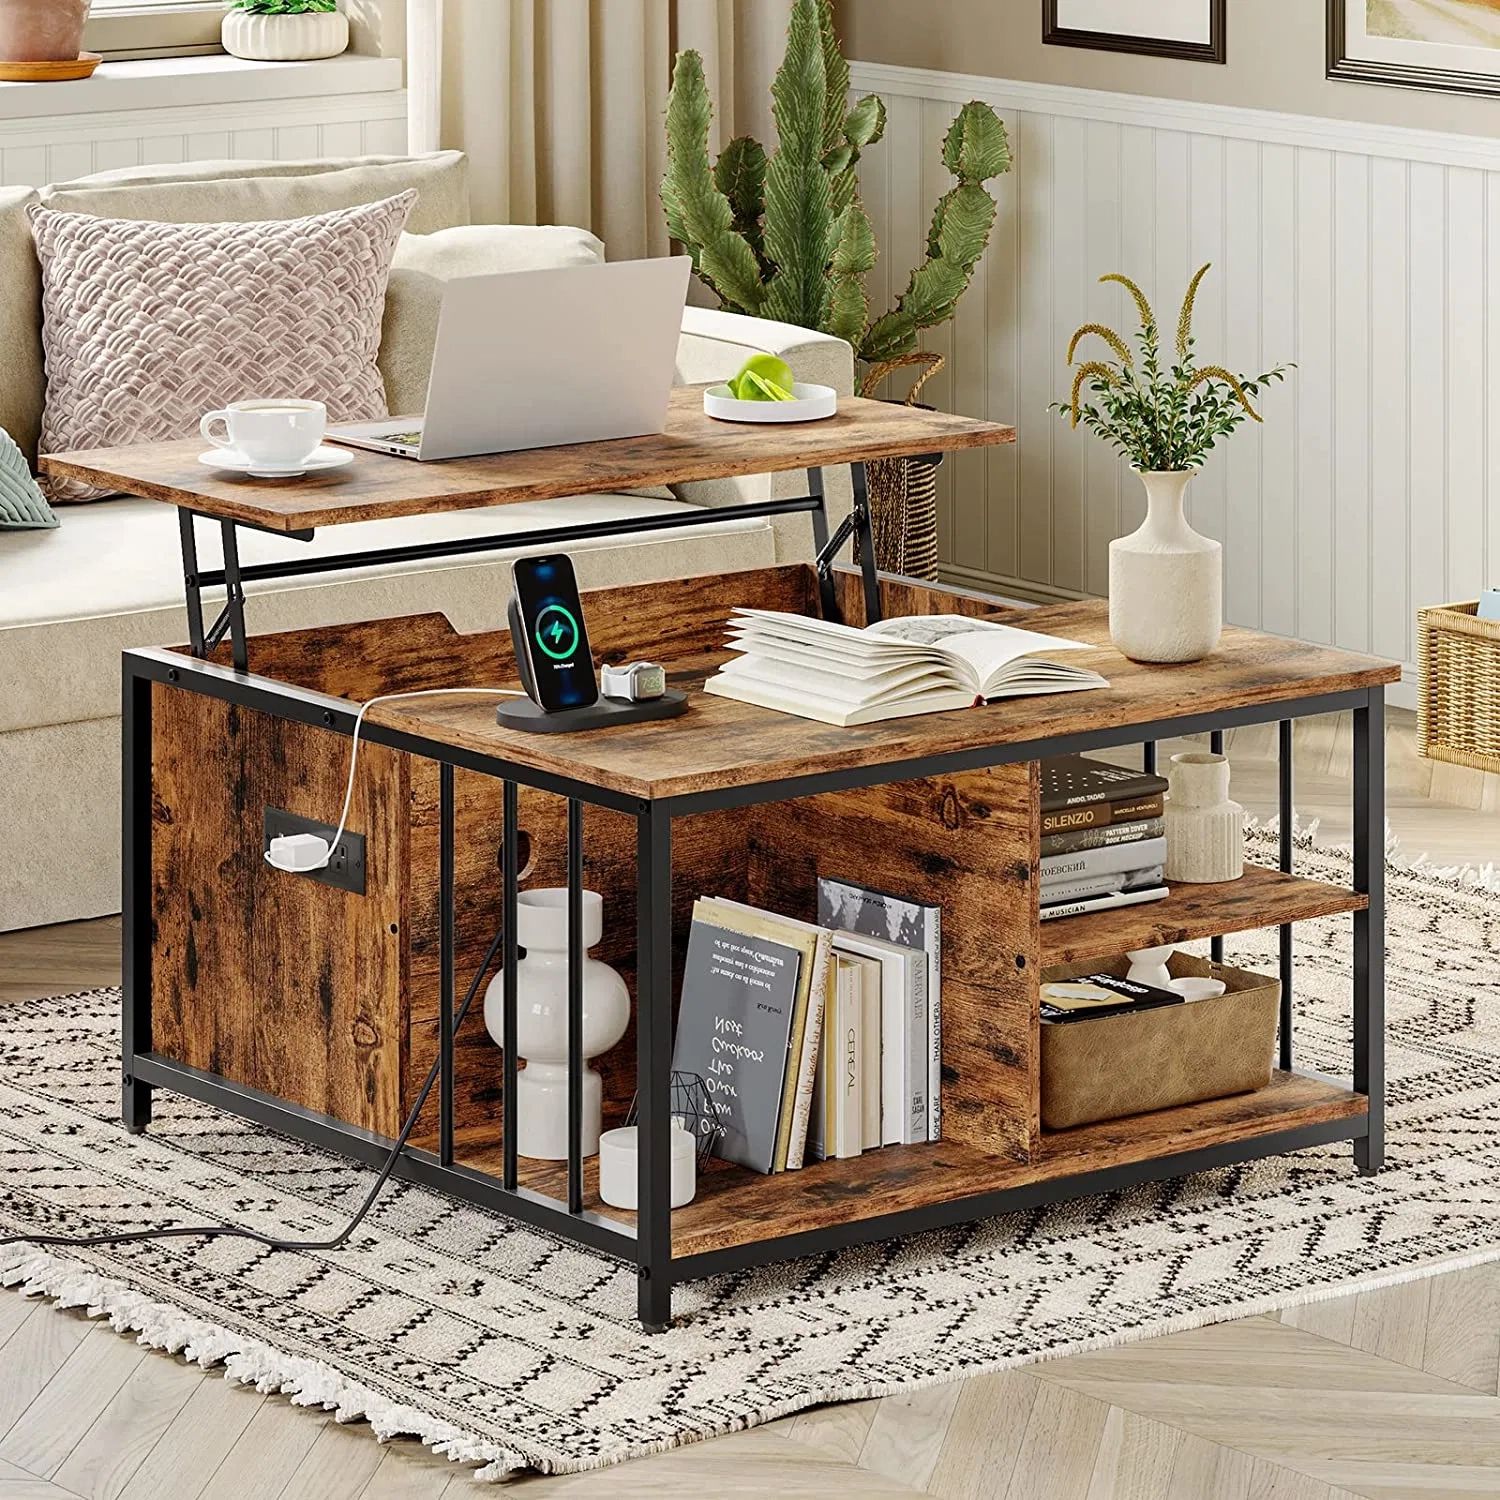 Farmhouse Square Lift Top Coffee Table With Storage And Hidden Compartment  Charging Station – China Coffee Table, Lift Top Coffee Table |  Made In China Inside Lift Top Coffee Tables With Hidden Storage Compartments (View 7 of 15)